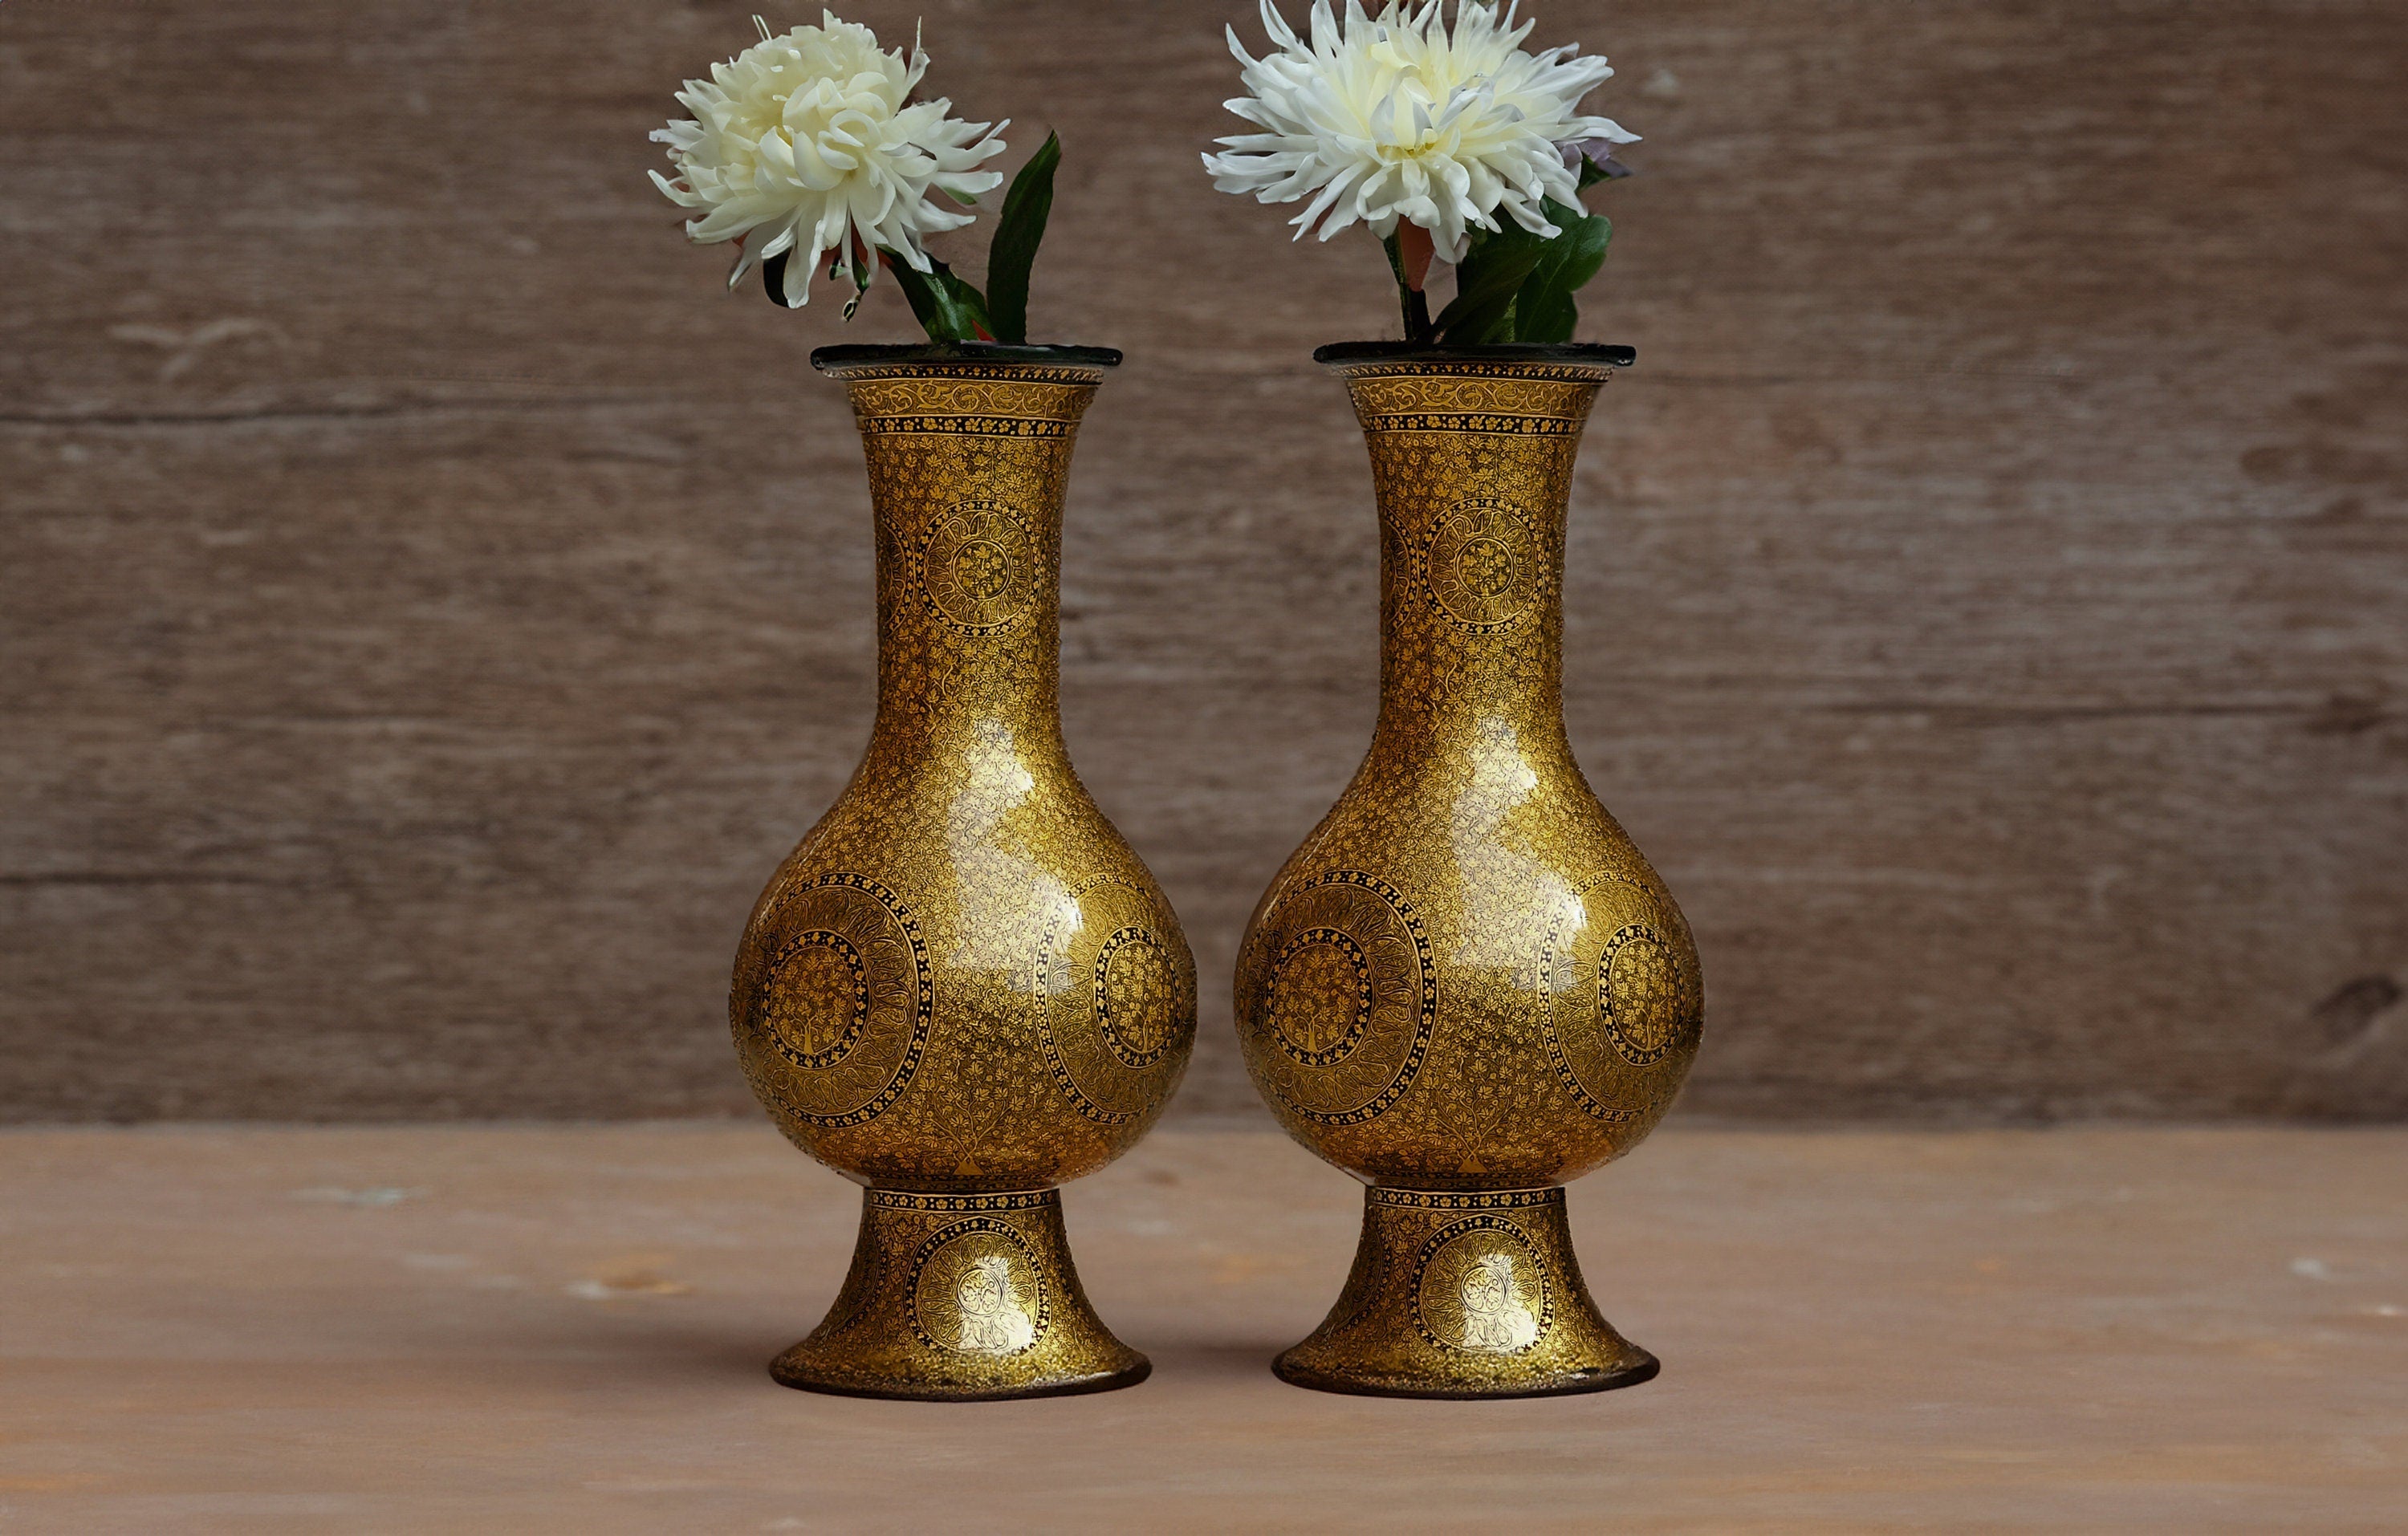 Papier Mache Vase Pair - 16" Tall with Gold Chinar Leaf Painting, Perfect for Bedroom Decor or Wedding Gift